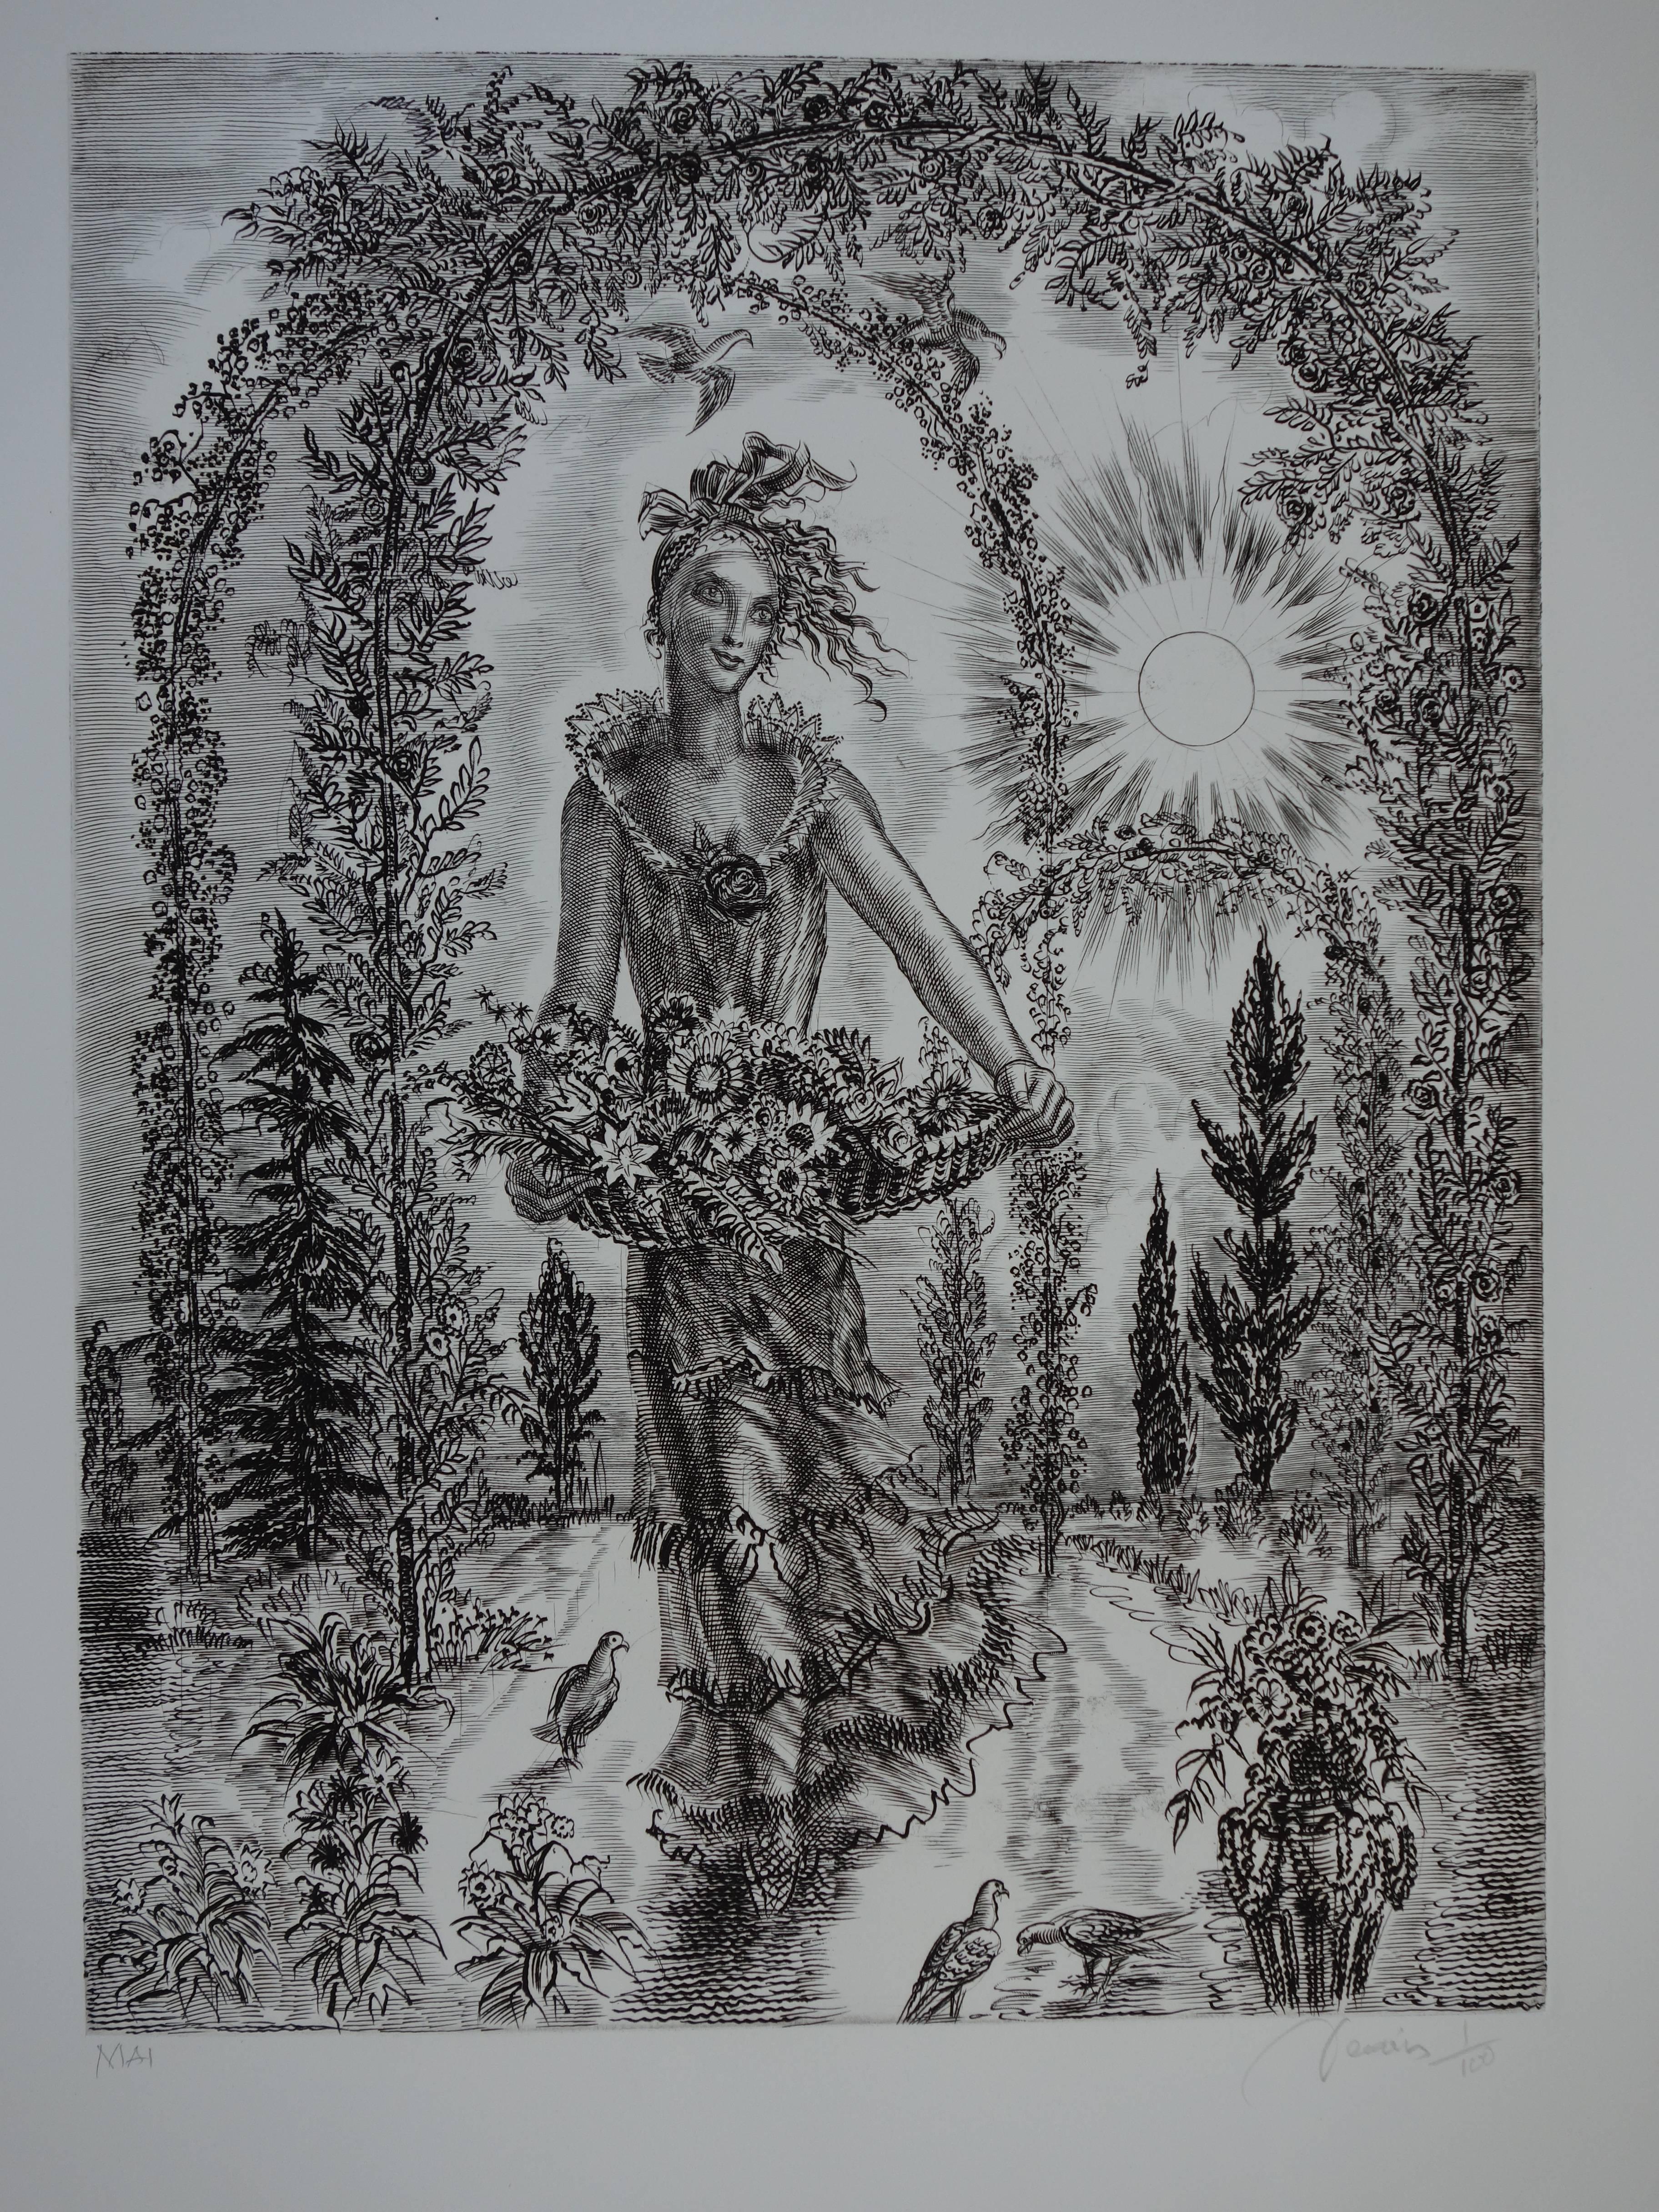 May : Blossom Spring - Original handsigned etching - Exceptional n° 1/100